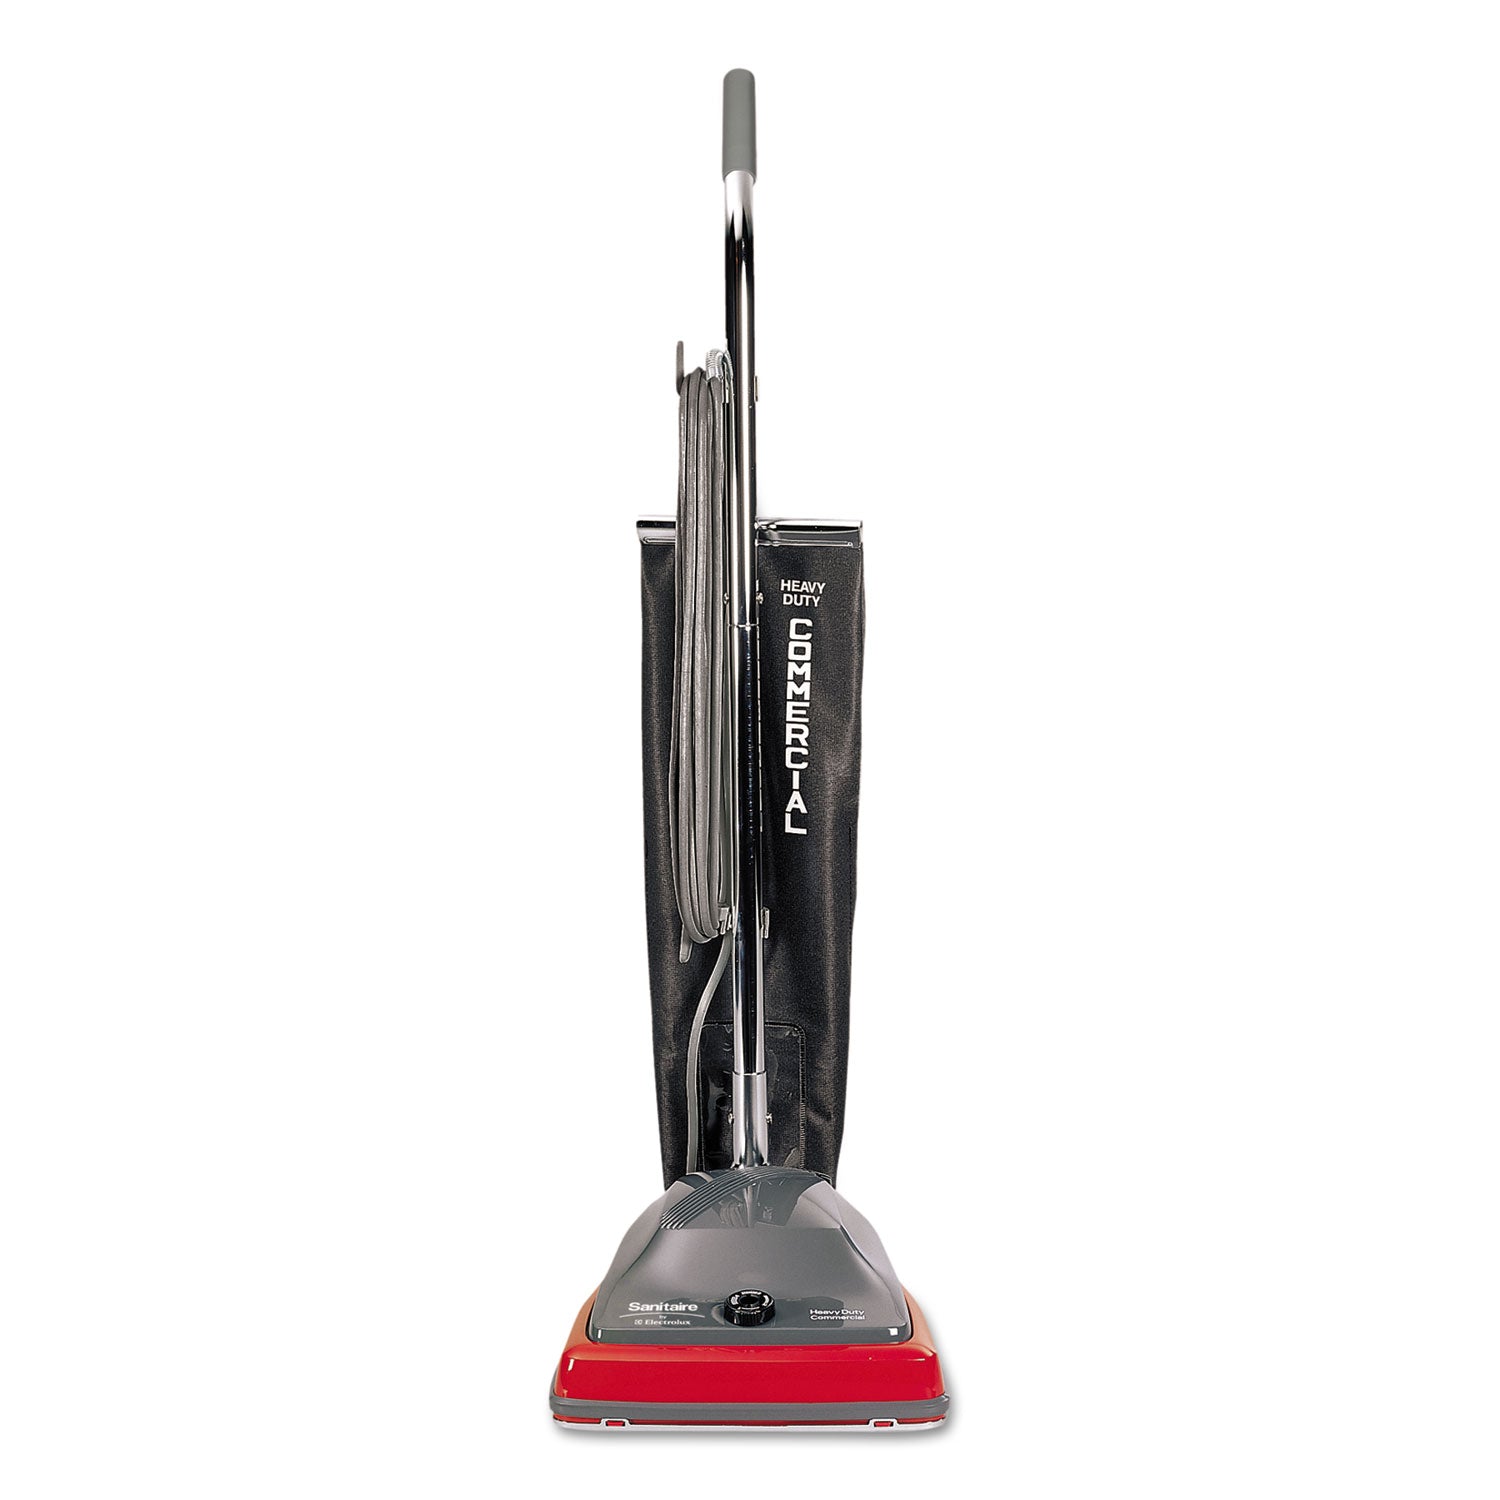 tradition-upright-vacuum-sc679j-12-cleaning-path-gray-red-black_eursc679k - 1